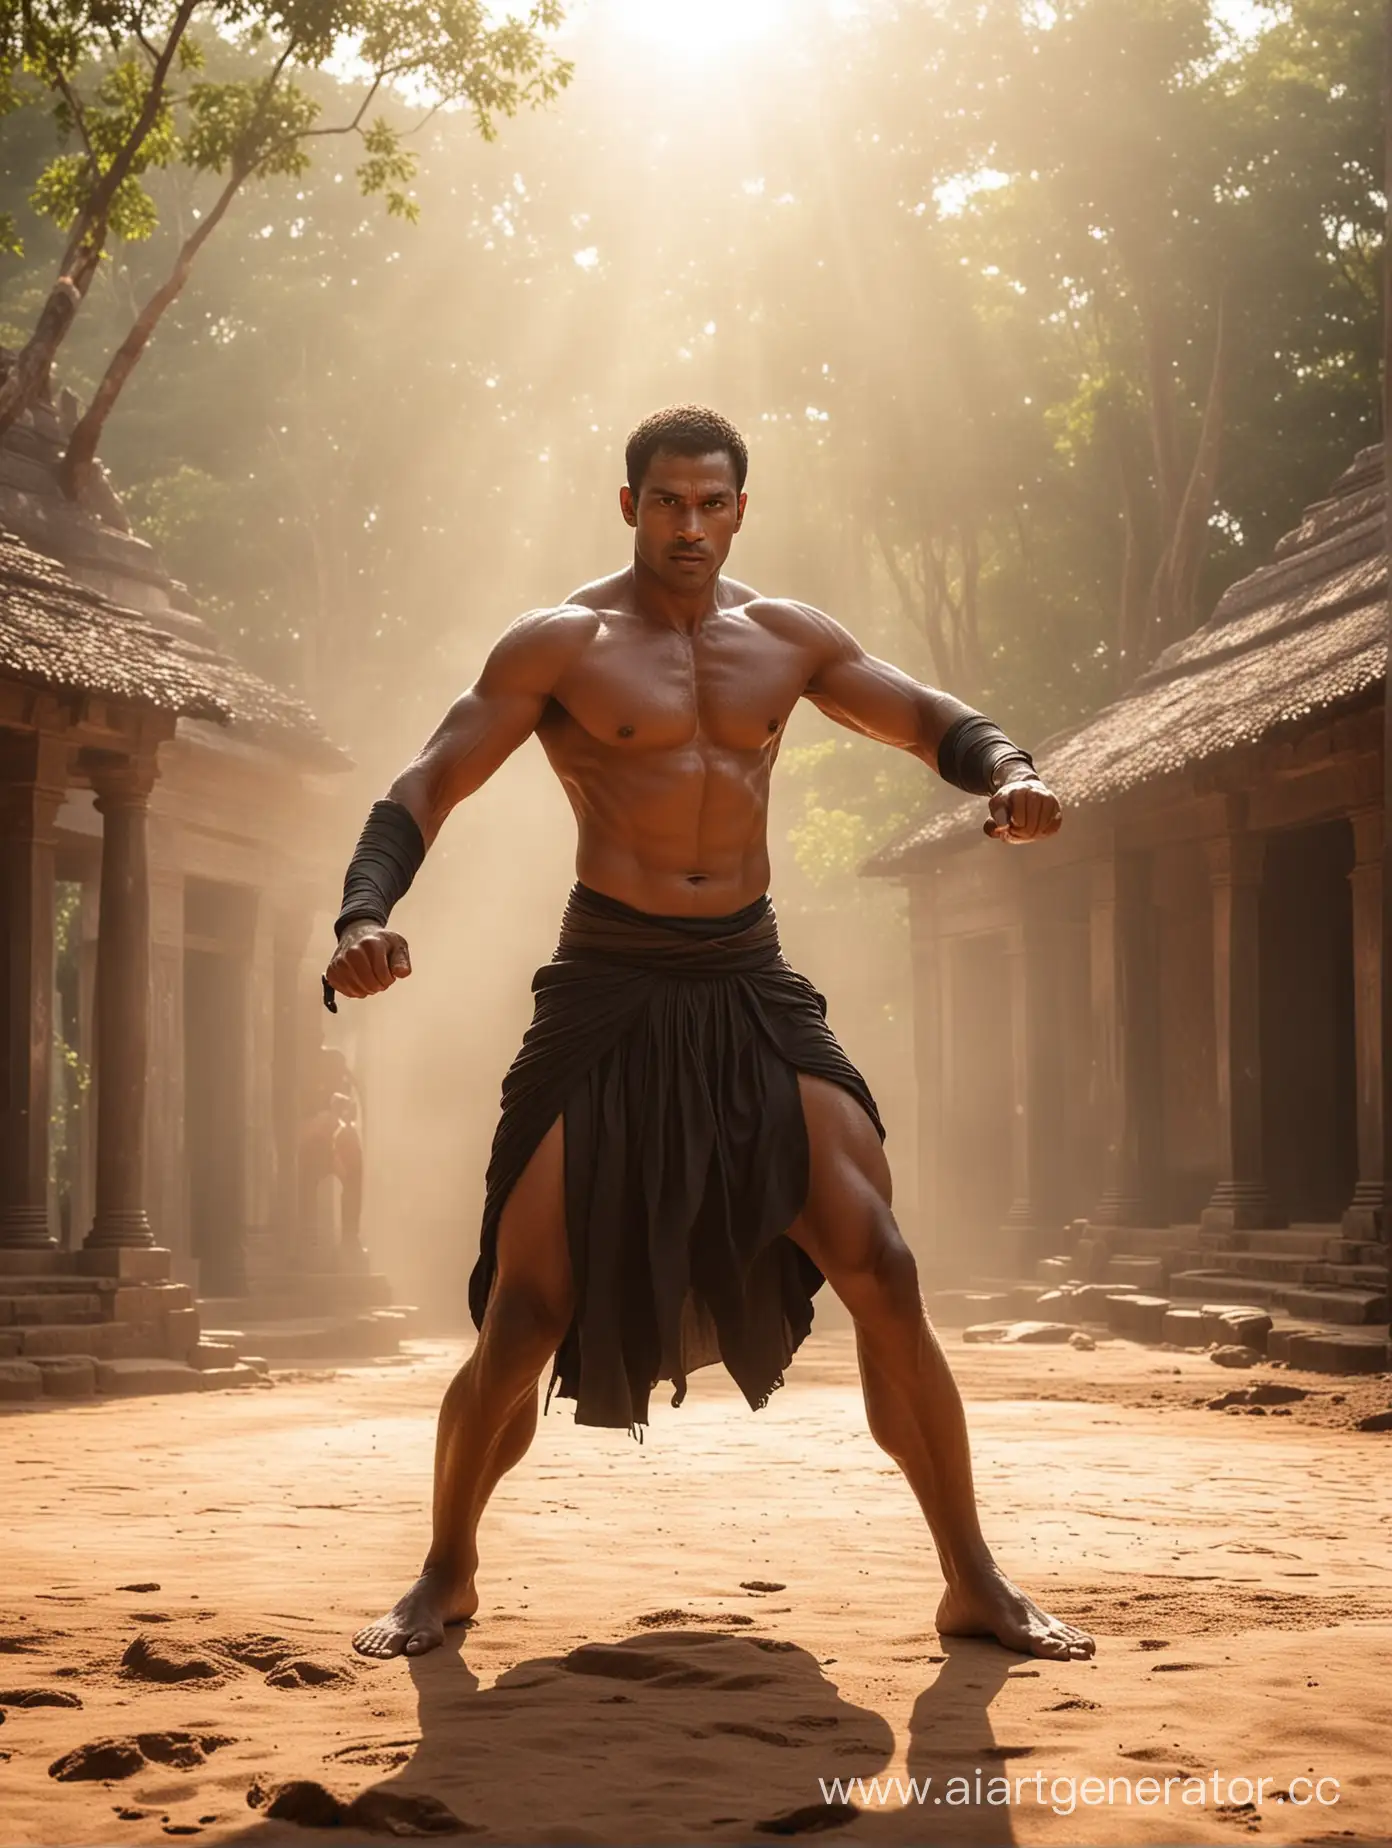 A powerful, muscular man performing a dynamic move, demonstrating his mastery of the deadly Kalaripayattu martial art. His body is covered in sweat, and he wears a traditional warrior's outfit. In the background, there's an ancient temple, and the sun casts a warm glow over the scene. The atmosphere is intense, with a sense of respect for the centuries-old martial art form.